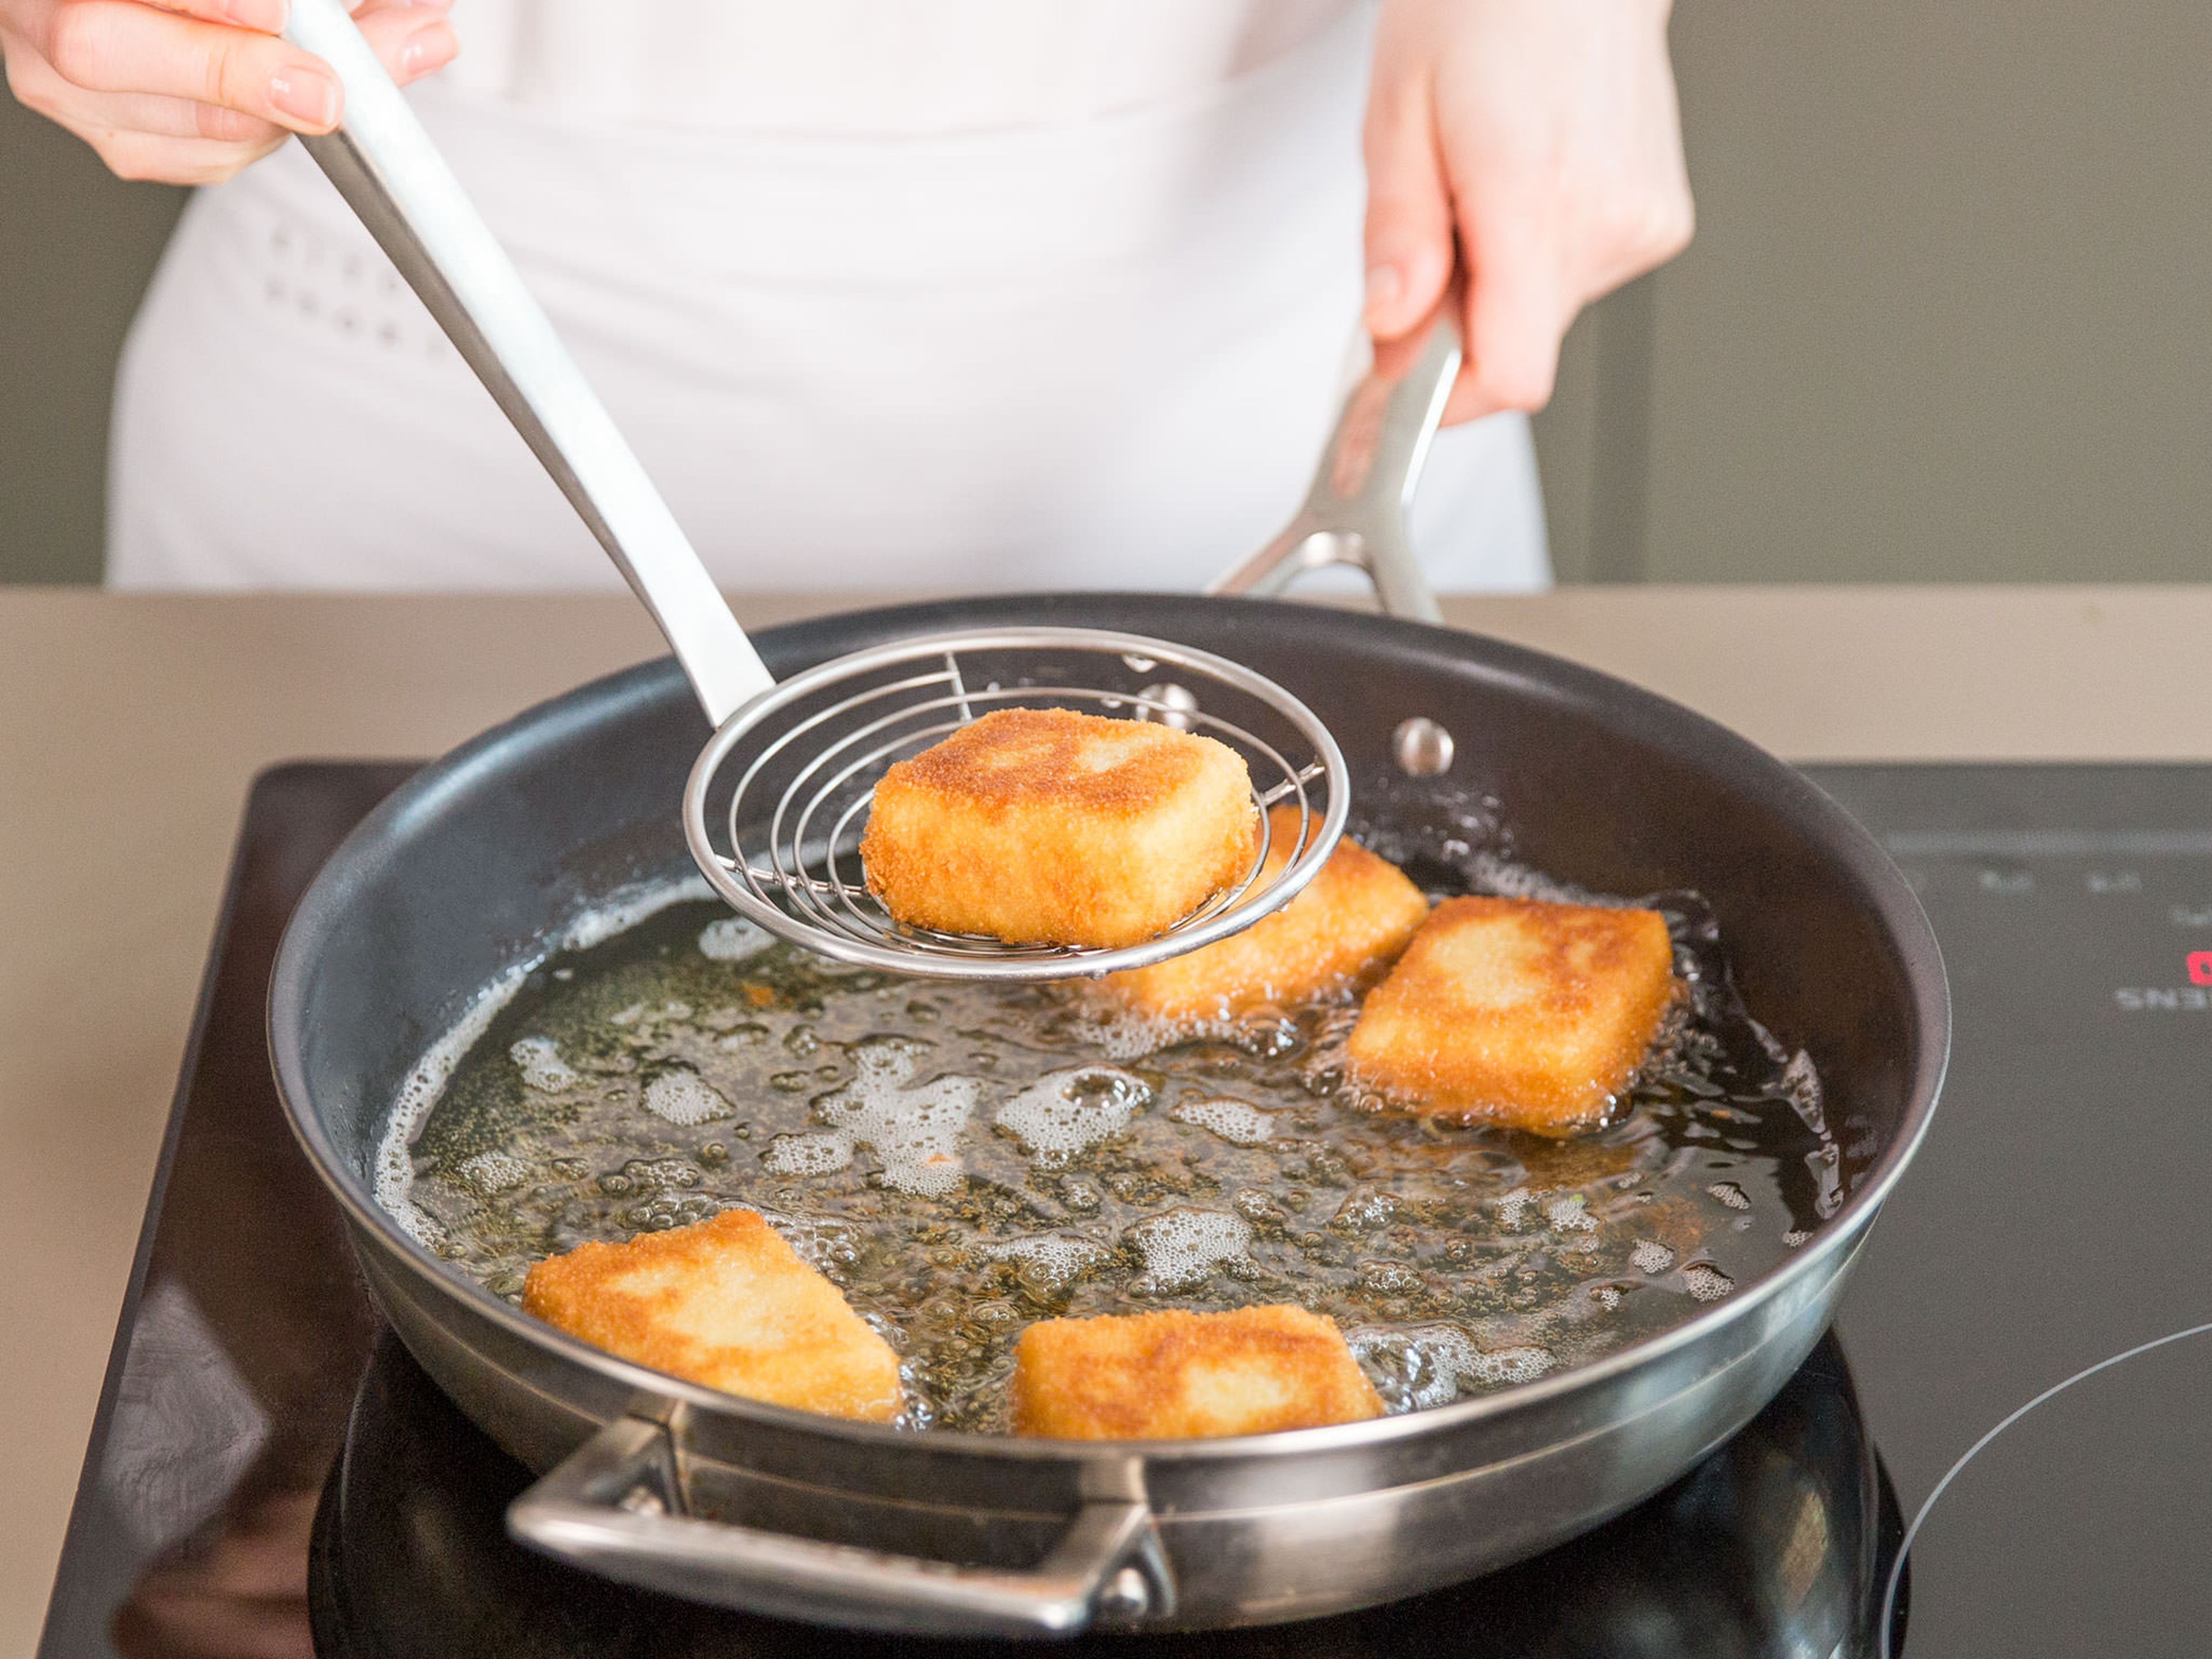 Heat oil in a large frying pan on medium heat. Sauté breaded squares from all sides for approx. 2 min. until golden brown. Transfer to a paper towel-lined plate to drain slightly.